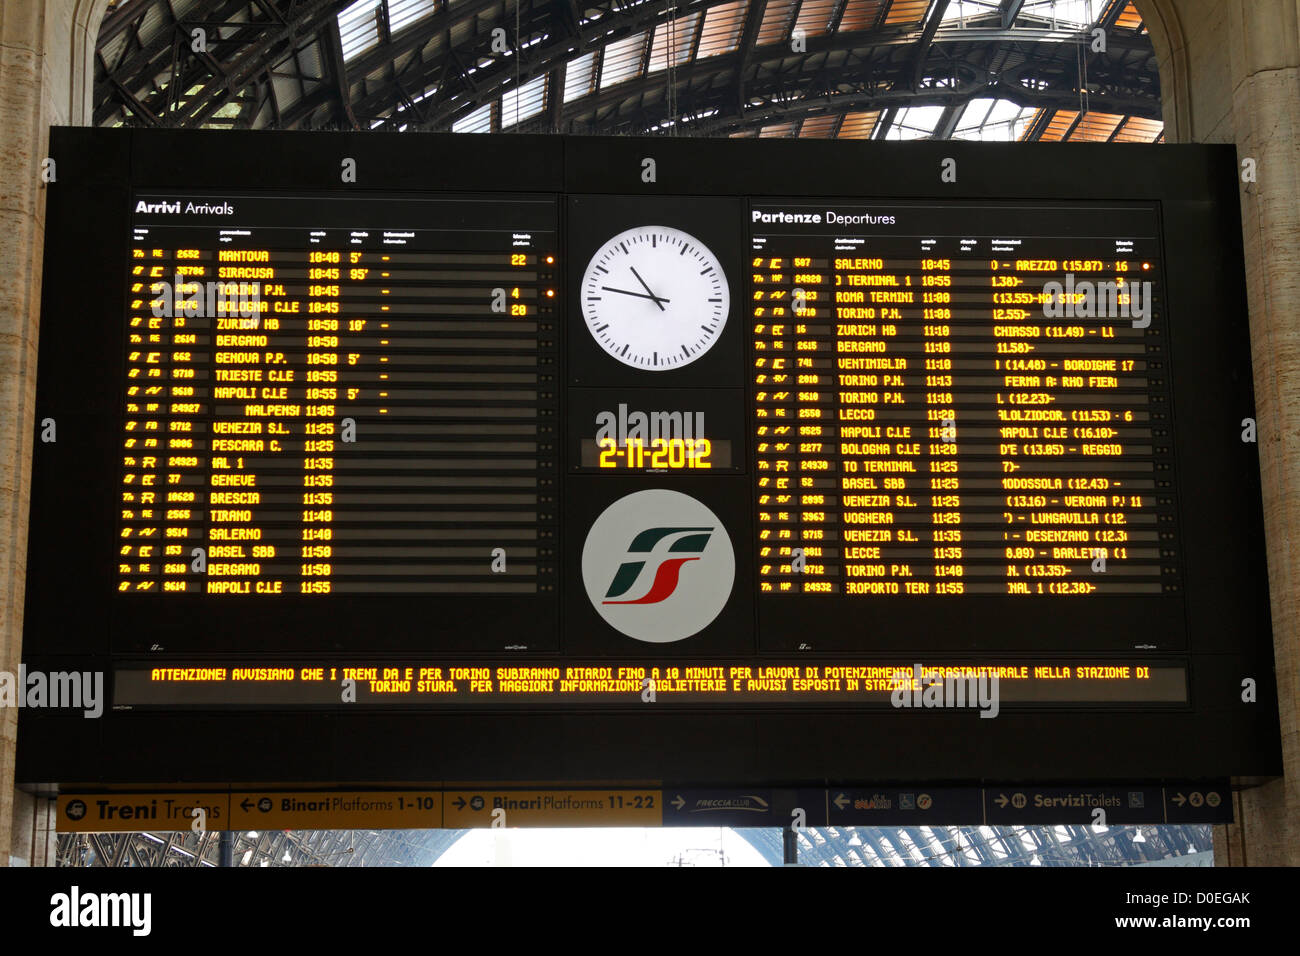 Milan Central Railway Station electronic departures and arrivals board, Italy, Europe, Stock Photo